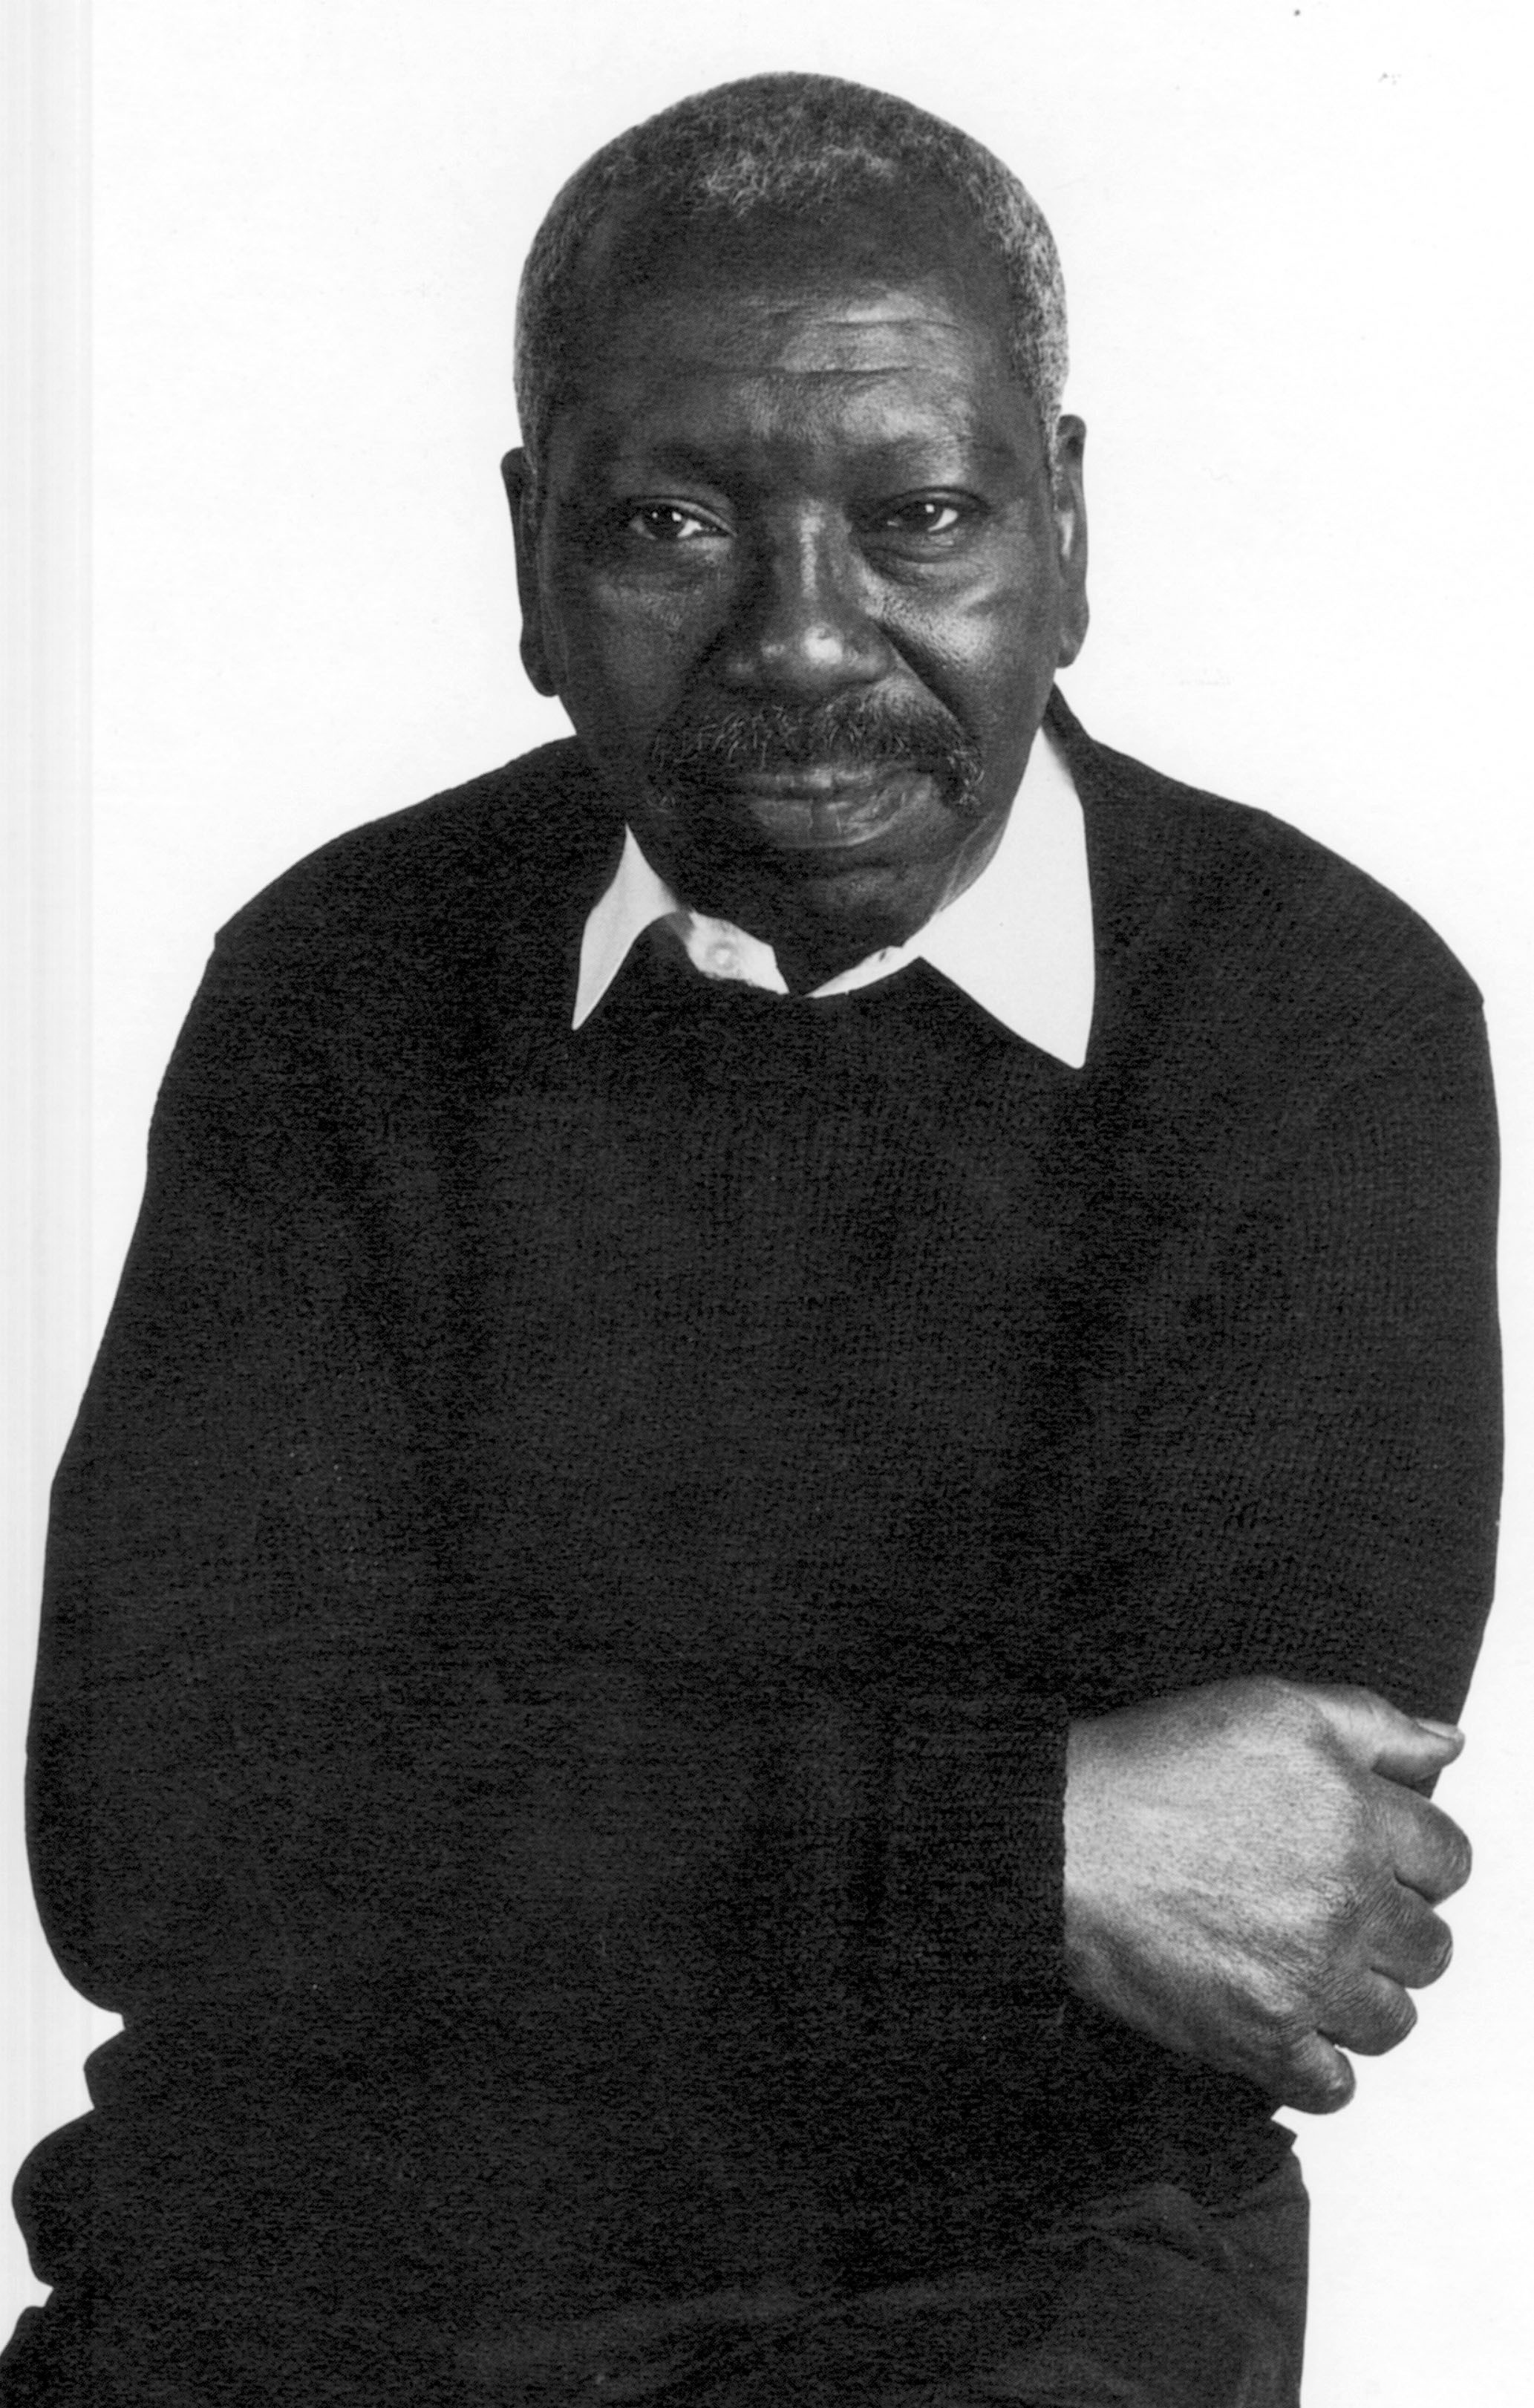 A photo of Jacob Lawrence